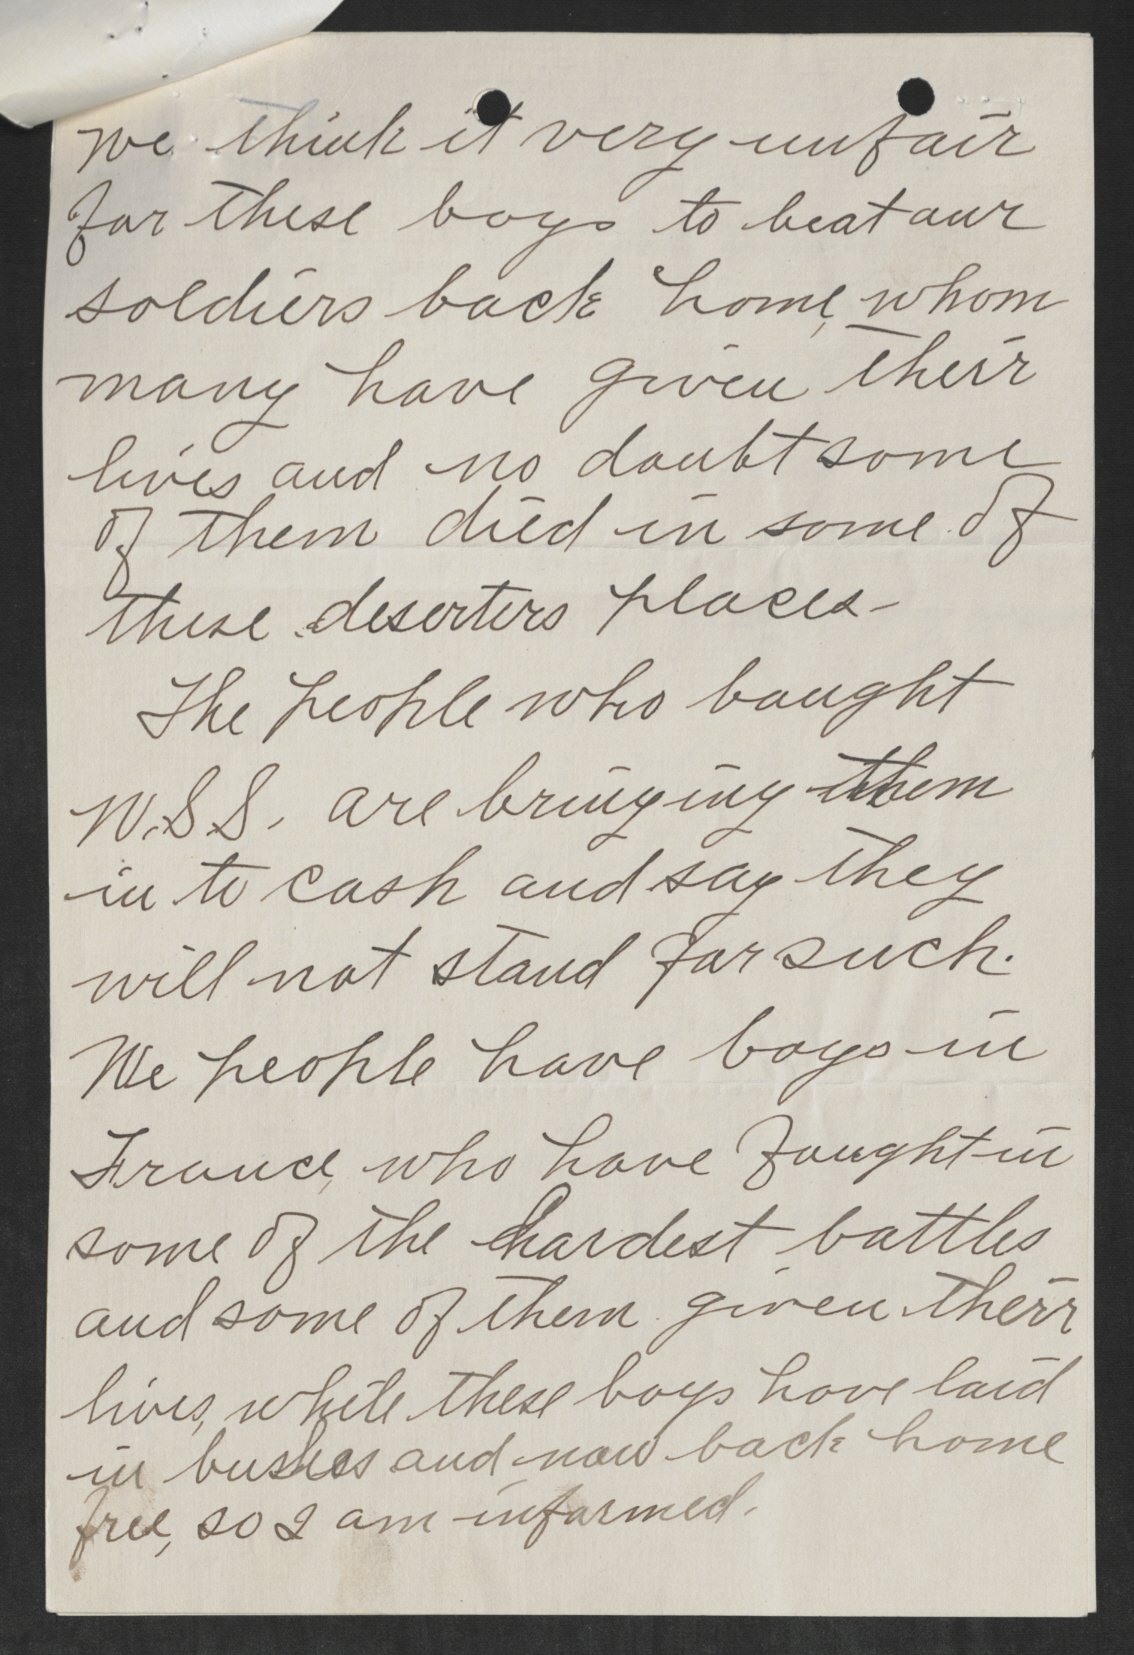 Letter from Jesse F. Cameron to Thomas W. Bickett, December 10, 1918, page 2